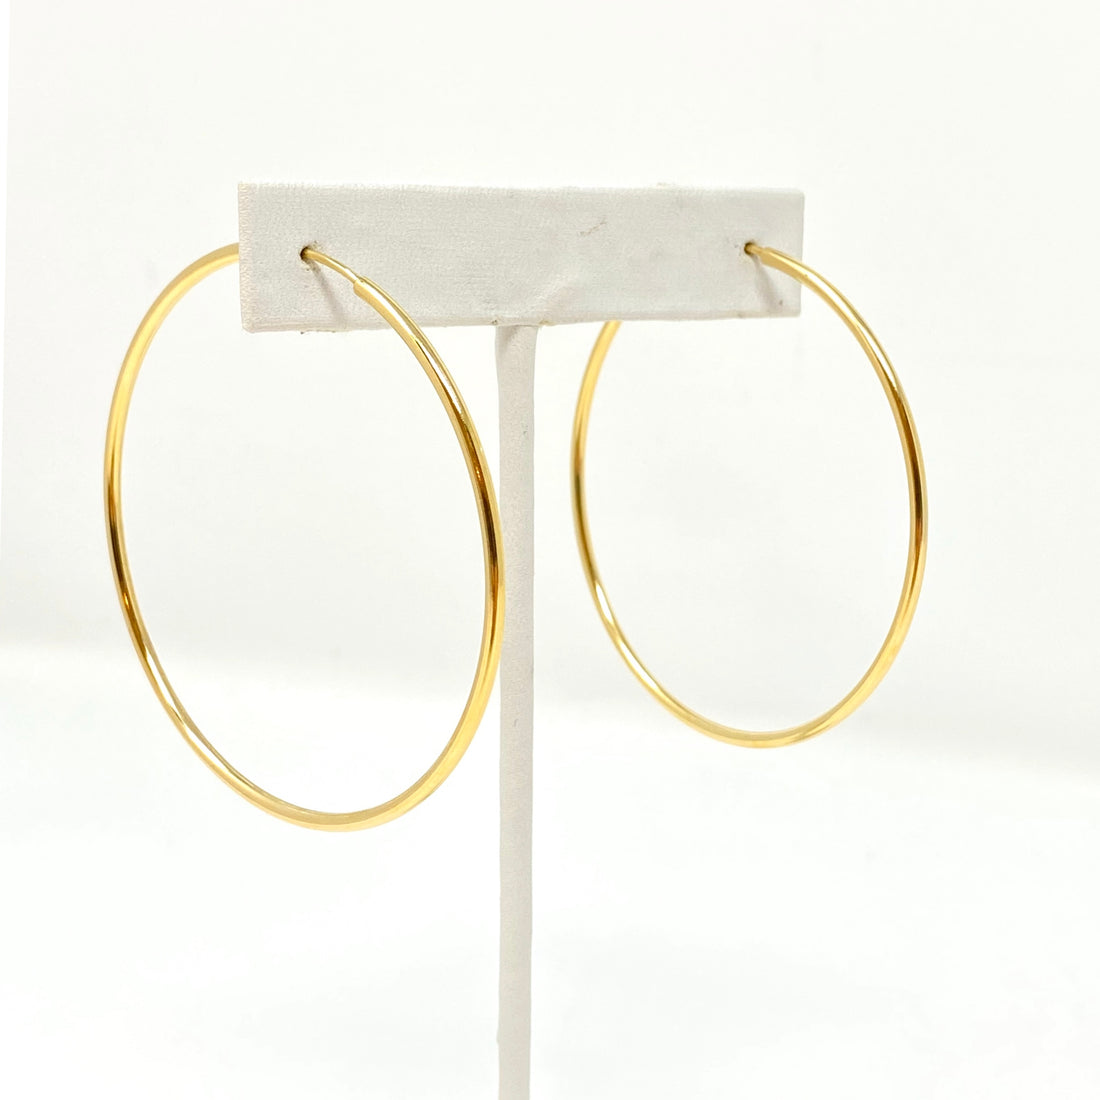 Large Hoops in 14K Gold Fill